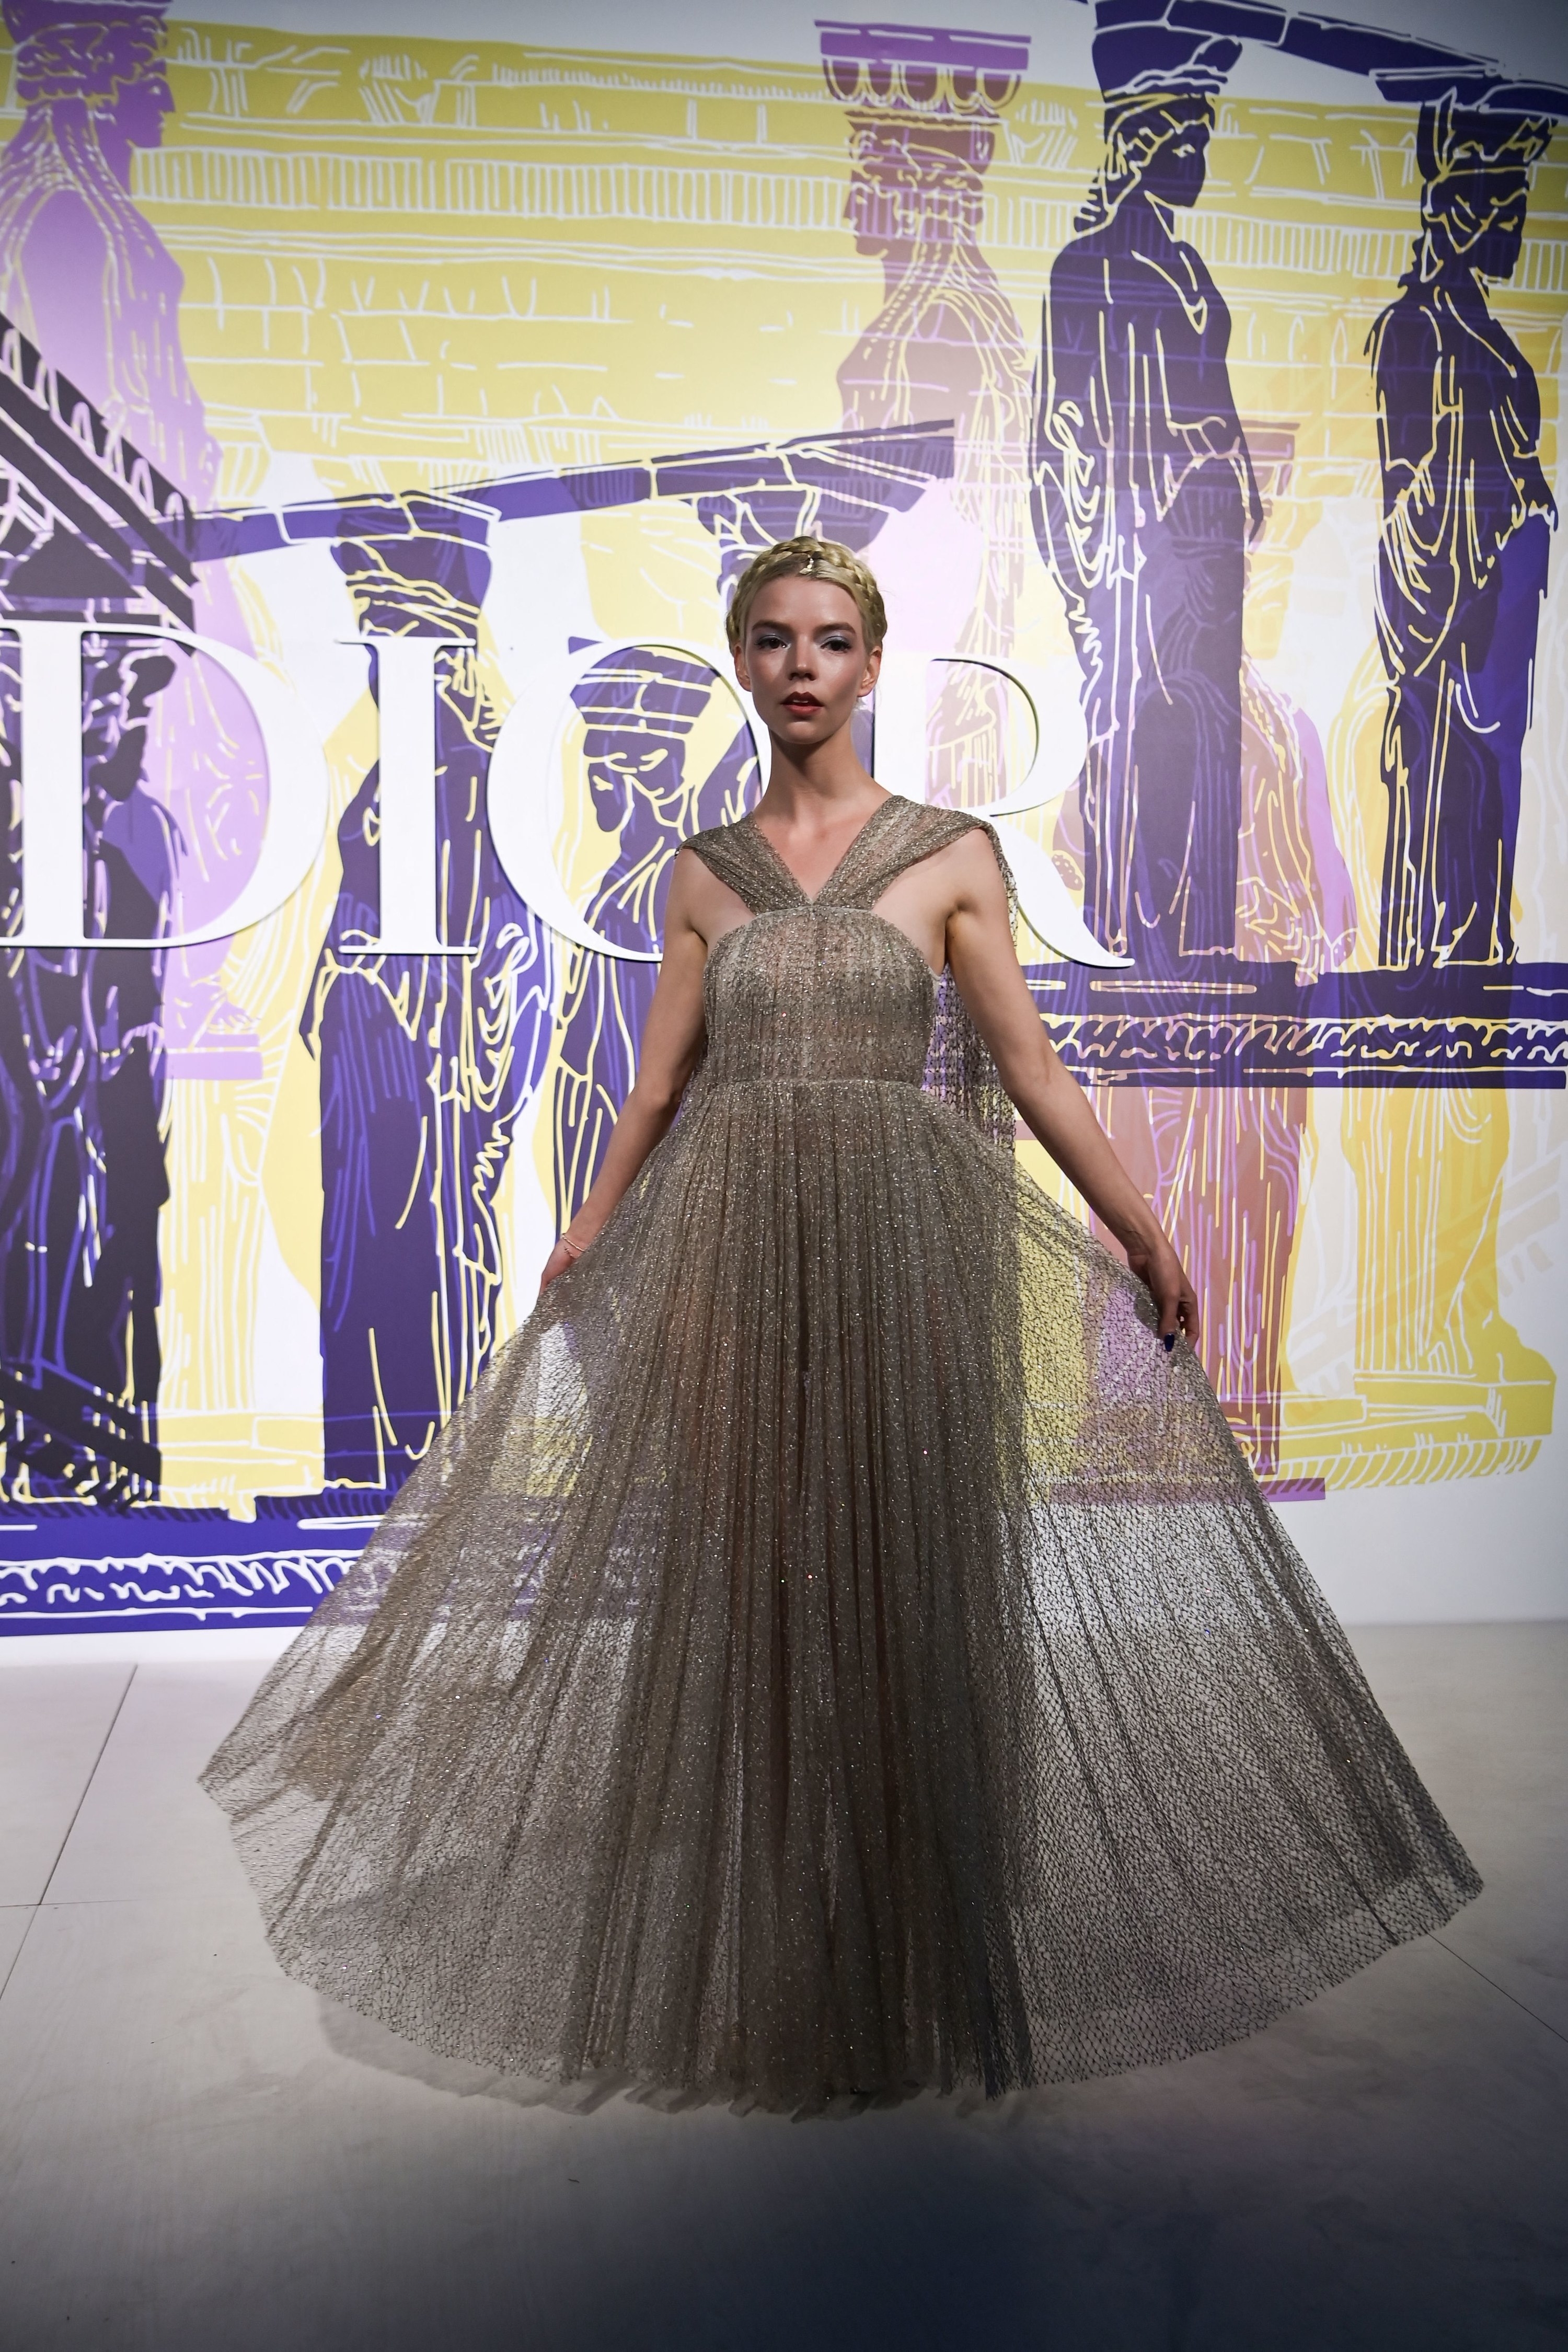 Anya Taylor-Joy wears a floor-length gown to the Dior fashion show